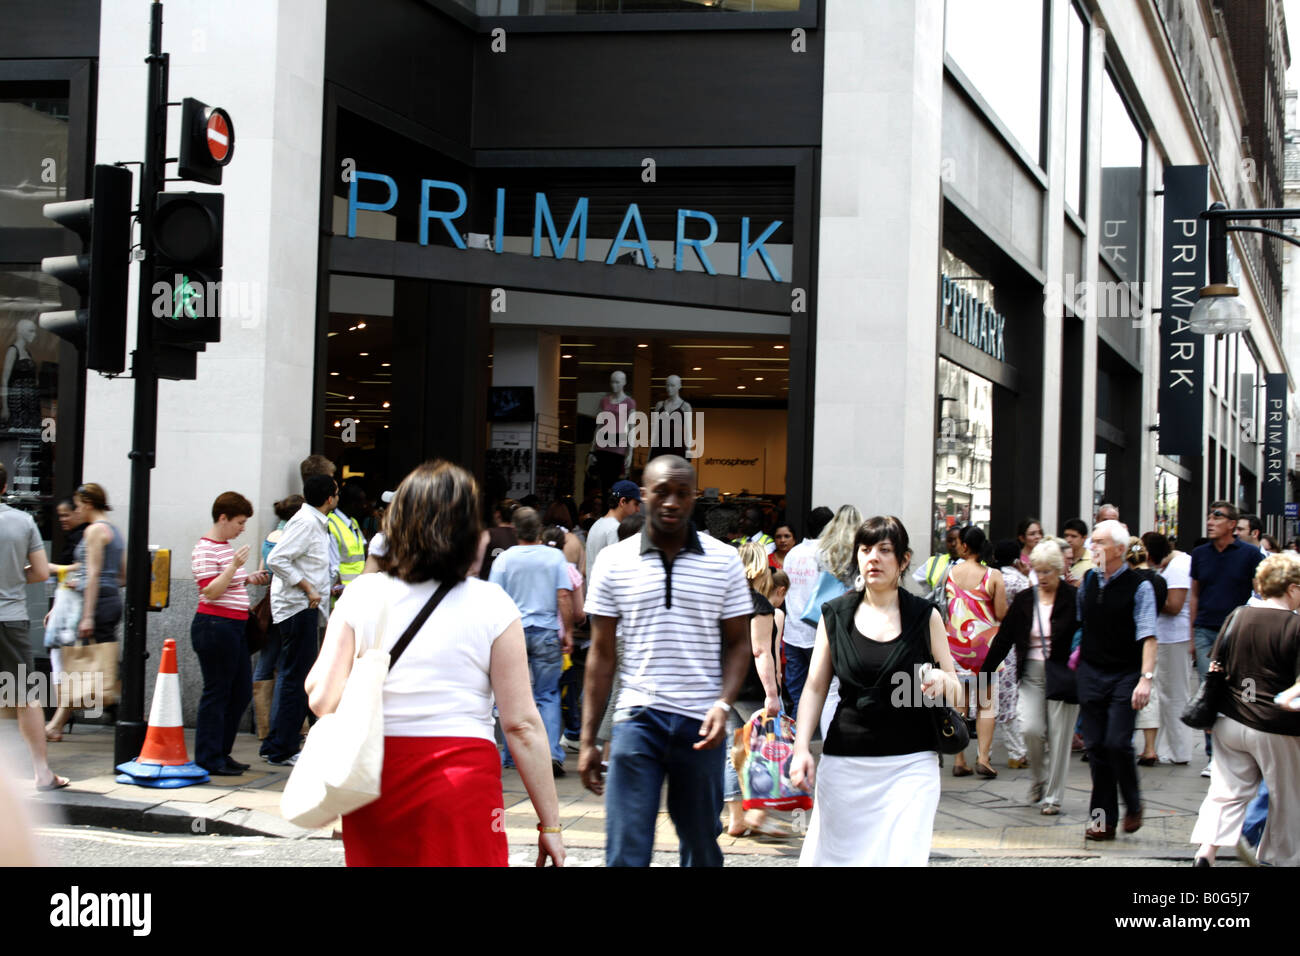 Primark Clothes High Resolution Stock Photography and Images - Alamy